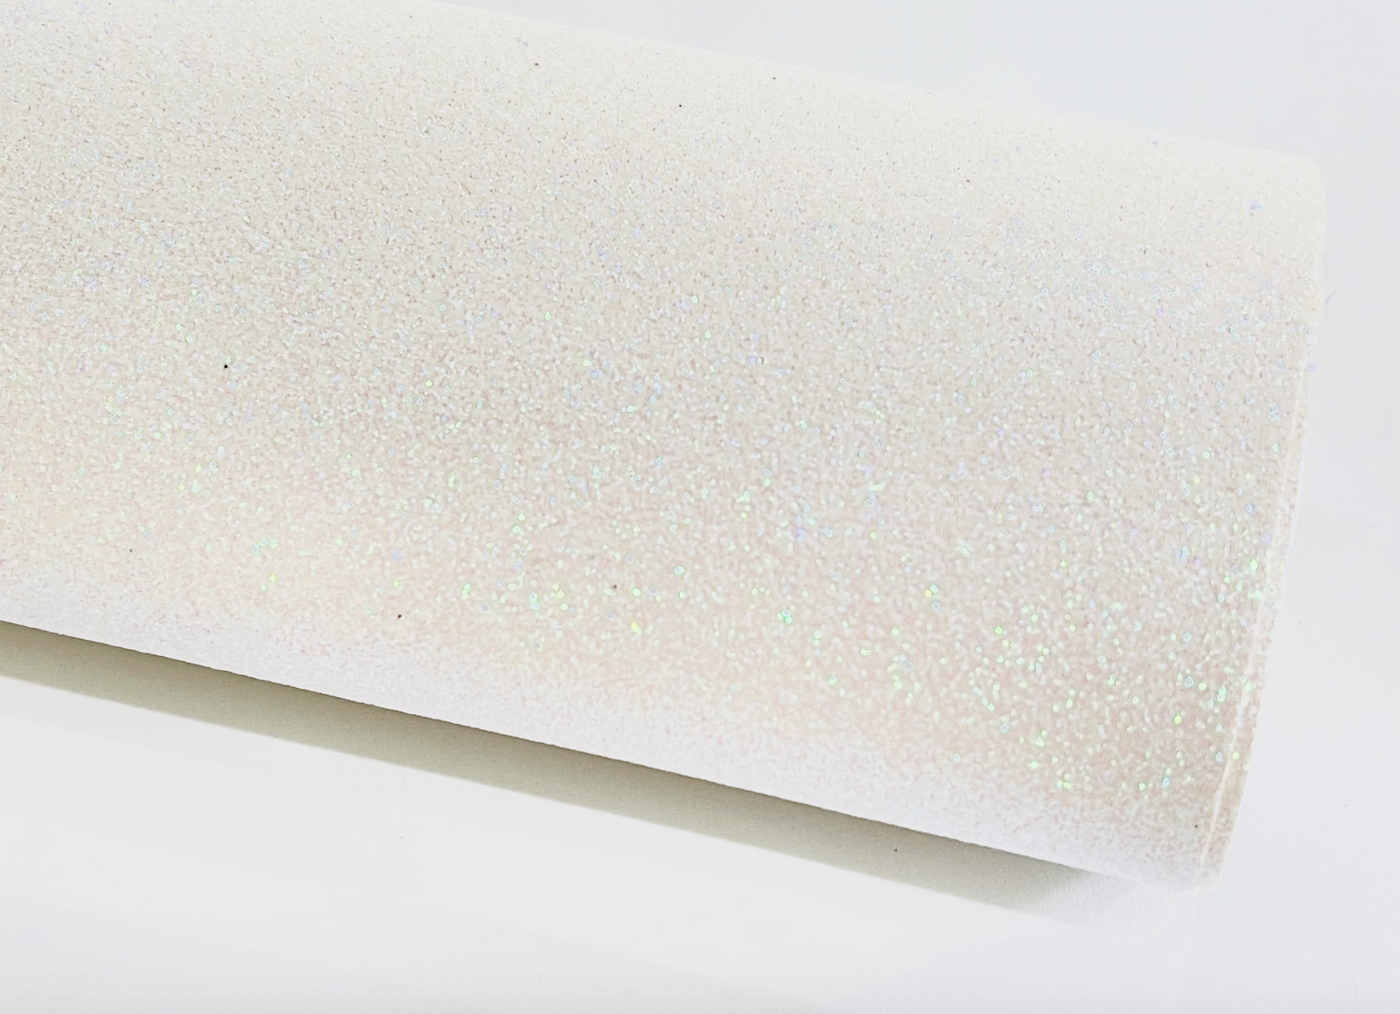 Marshmallow Pink White Fine Glitter - Now Thicker with Soft White Felt Rear